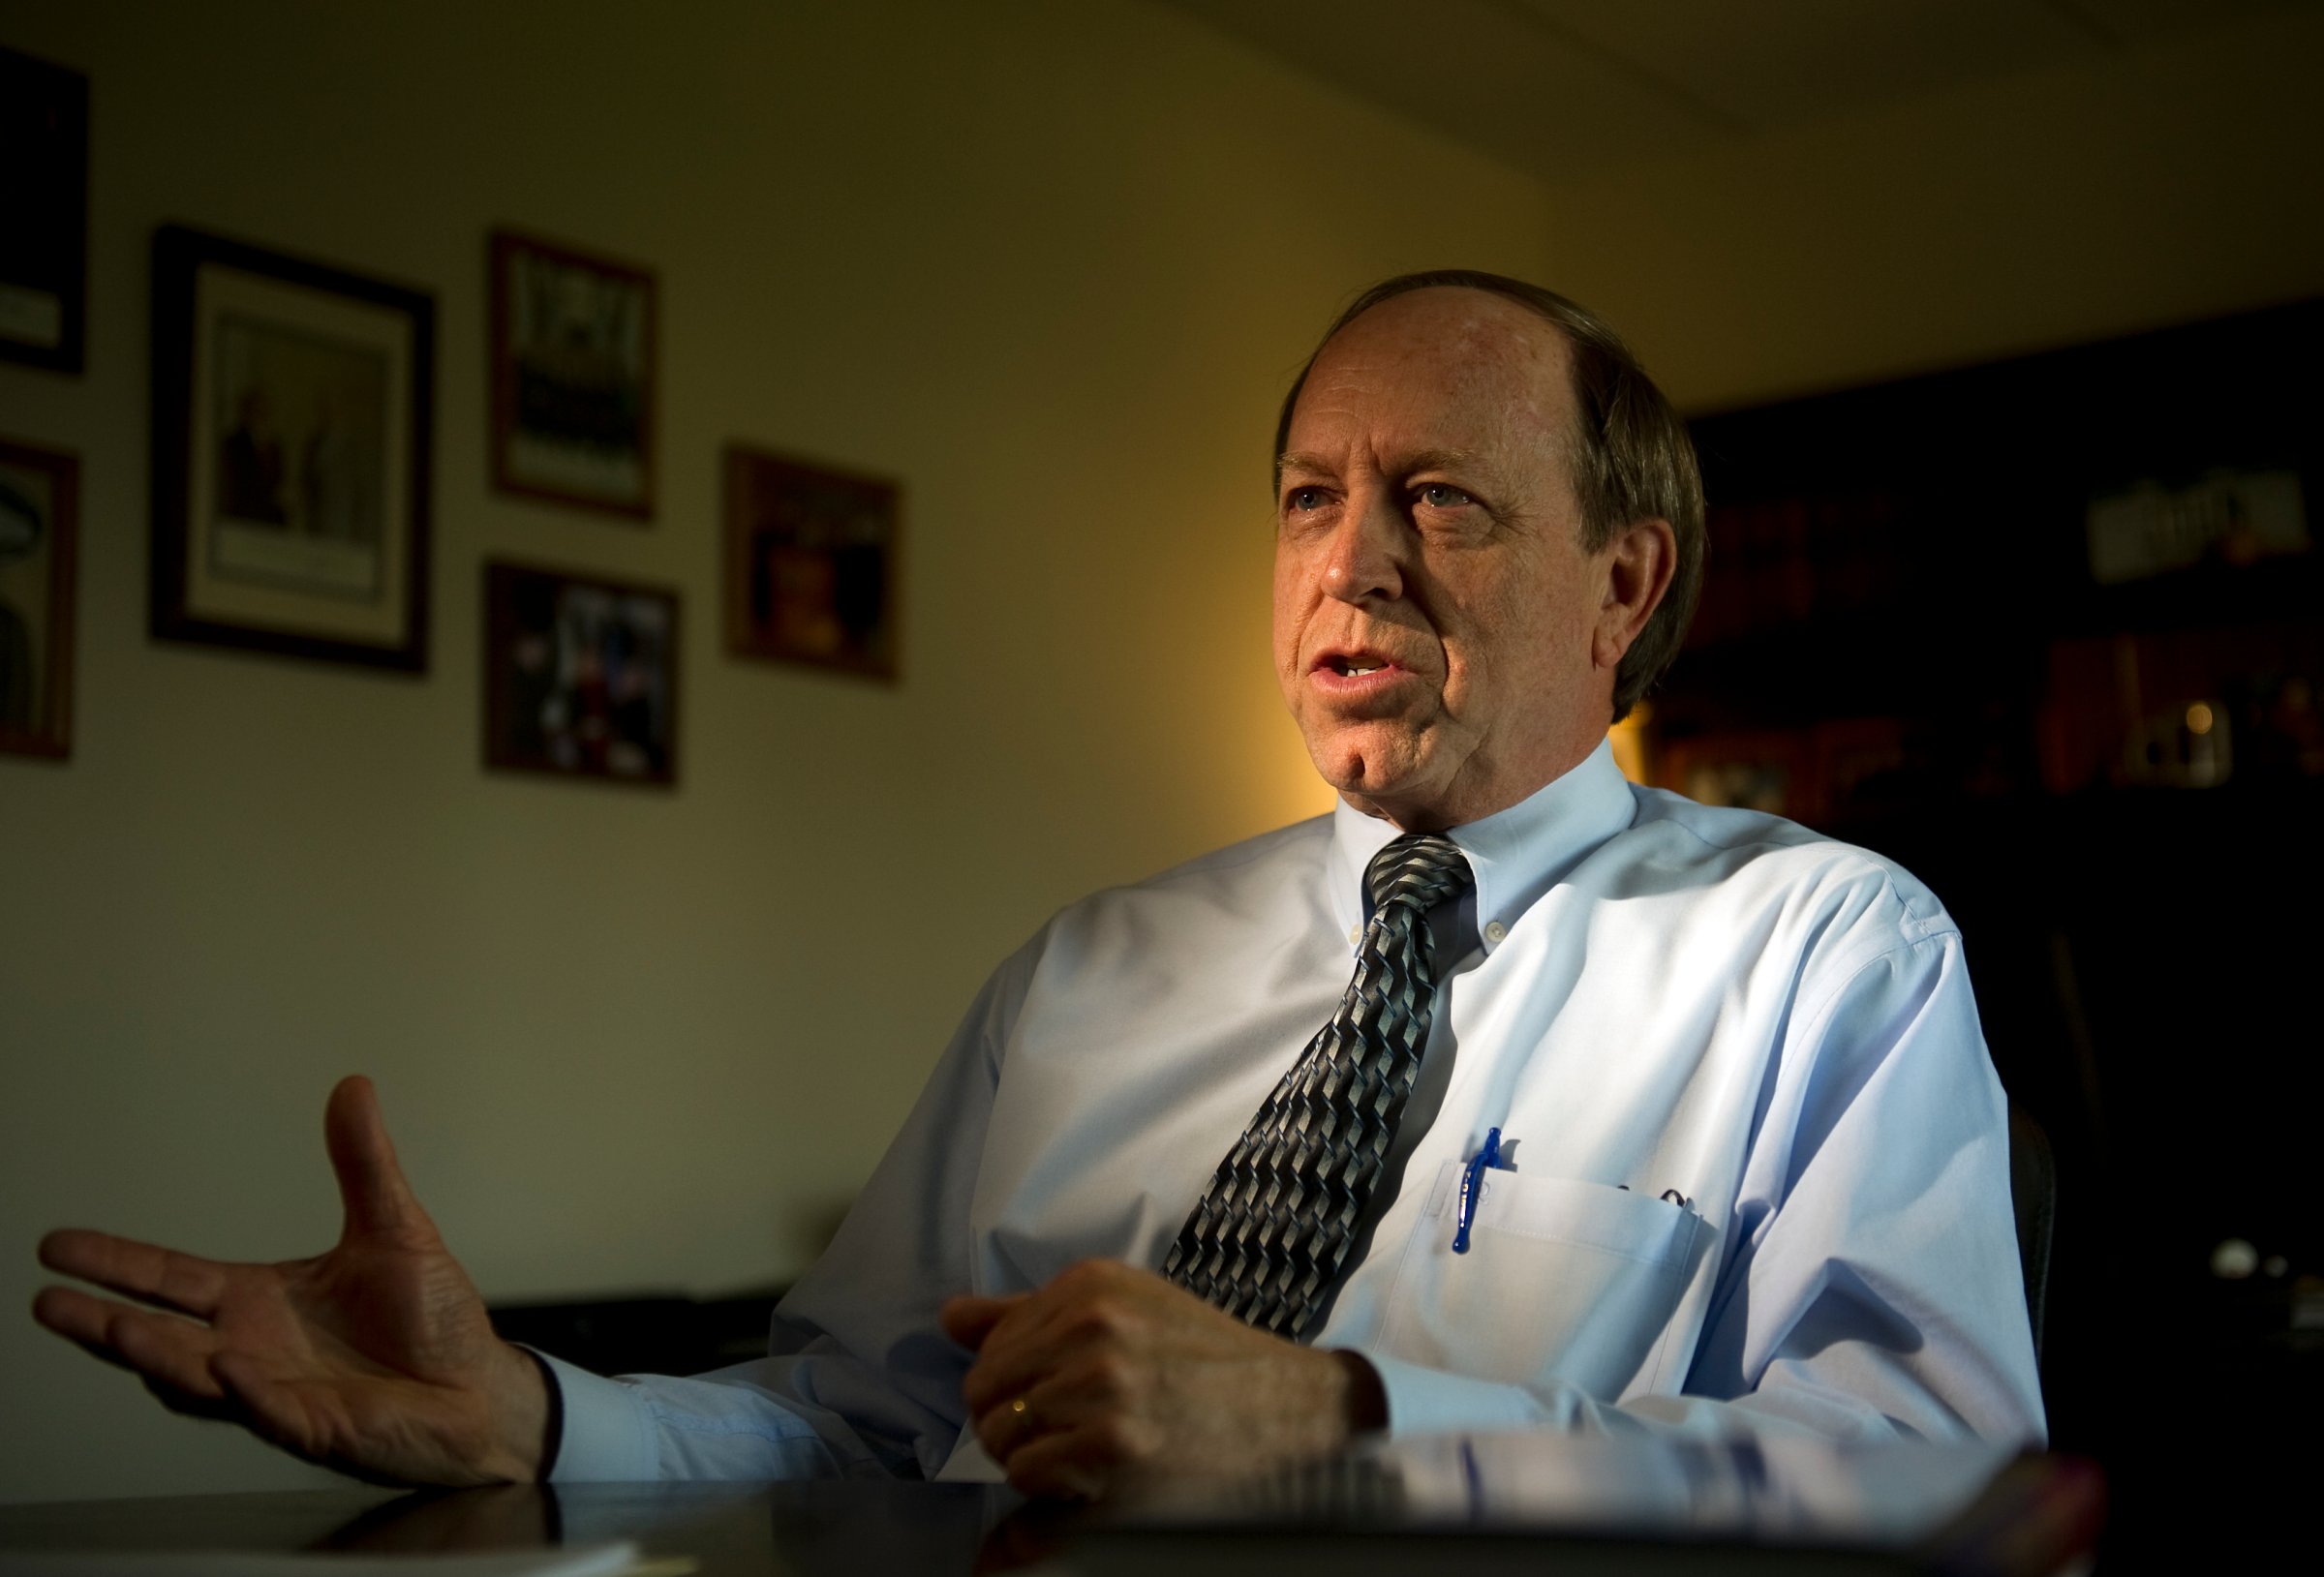 Colorado Attorney General John Suthers talked about the Hayman Fire and the plea agreement deal with Terry Barton. Suthers was in his office on Wednesday, May 23, 2012. Cyrus McCrimmon, The Denver Post